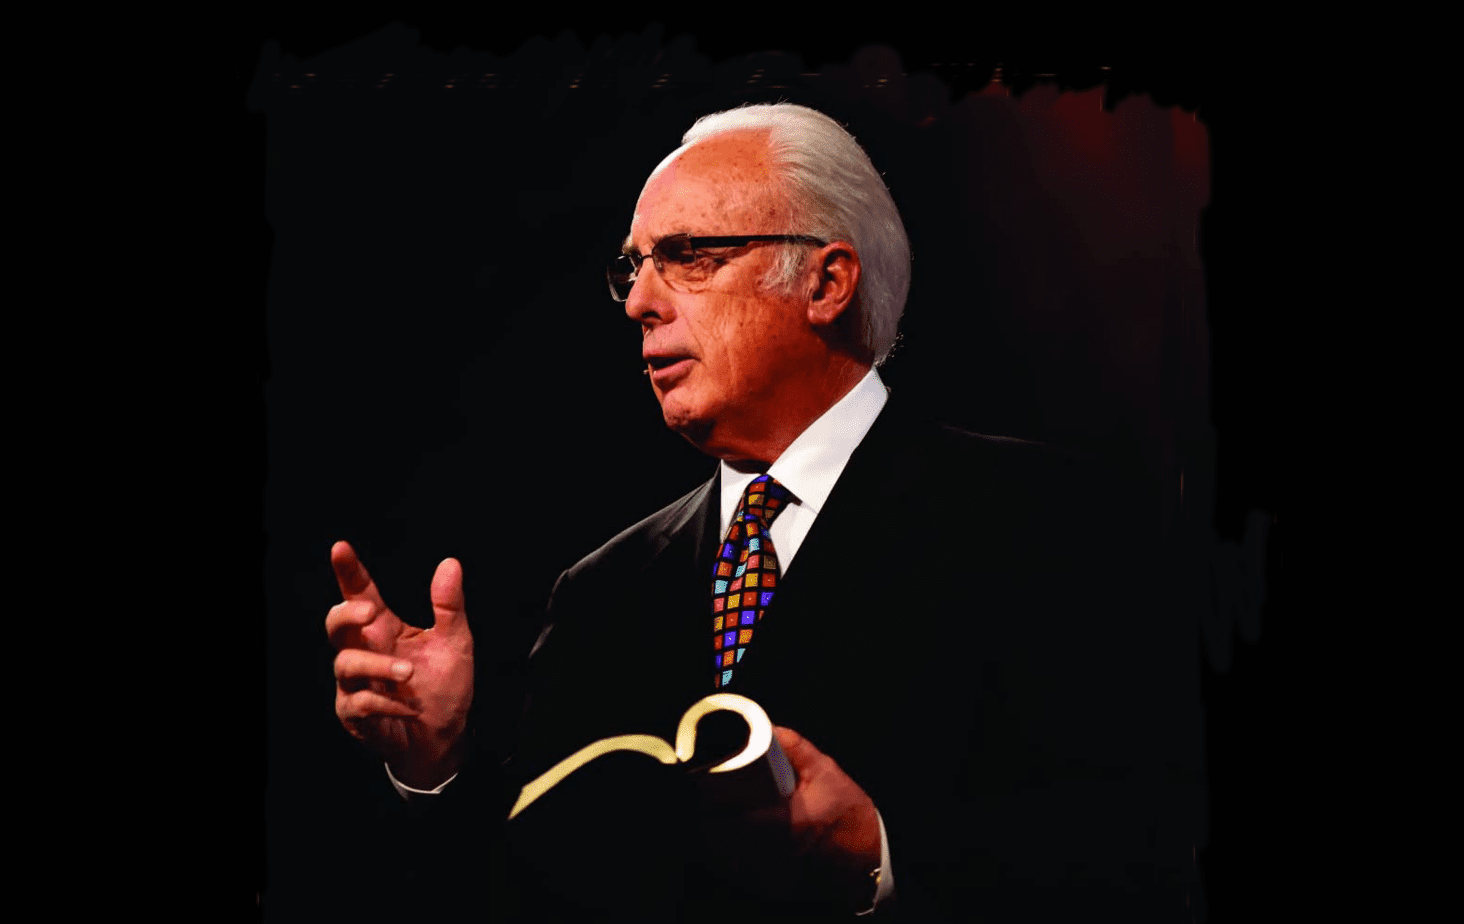 Dr John MacArthur – the man the minister and his message